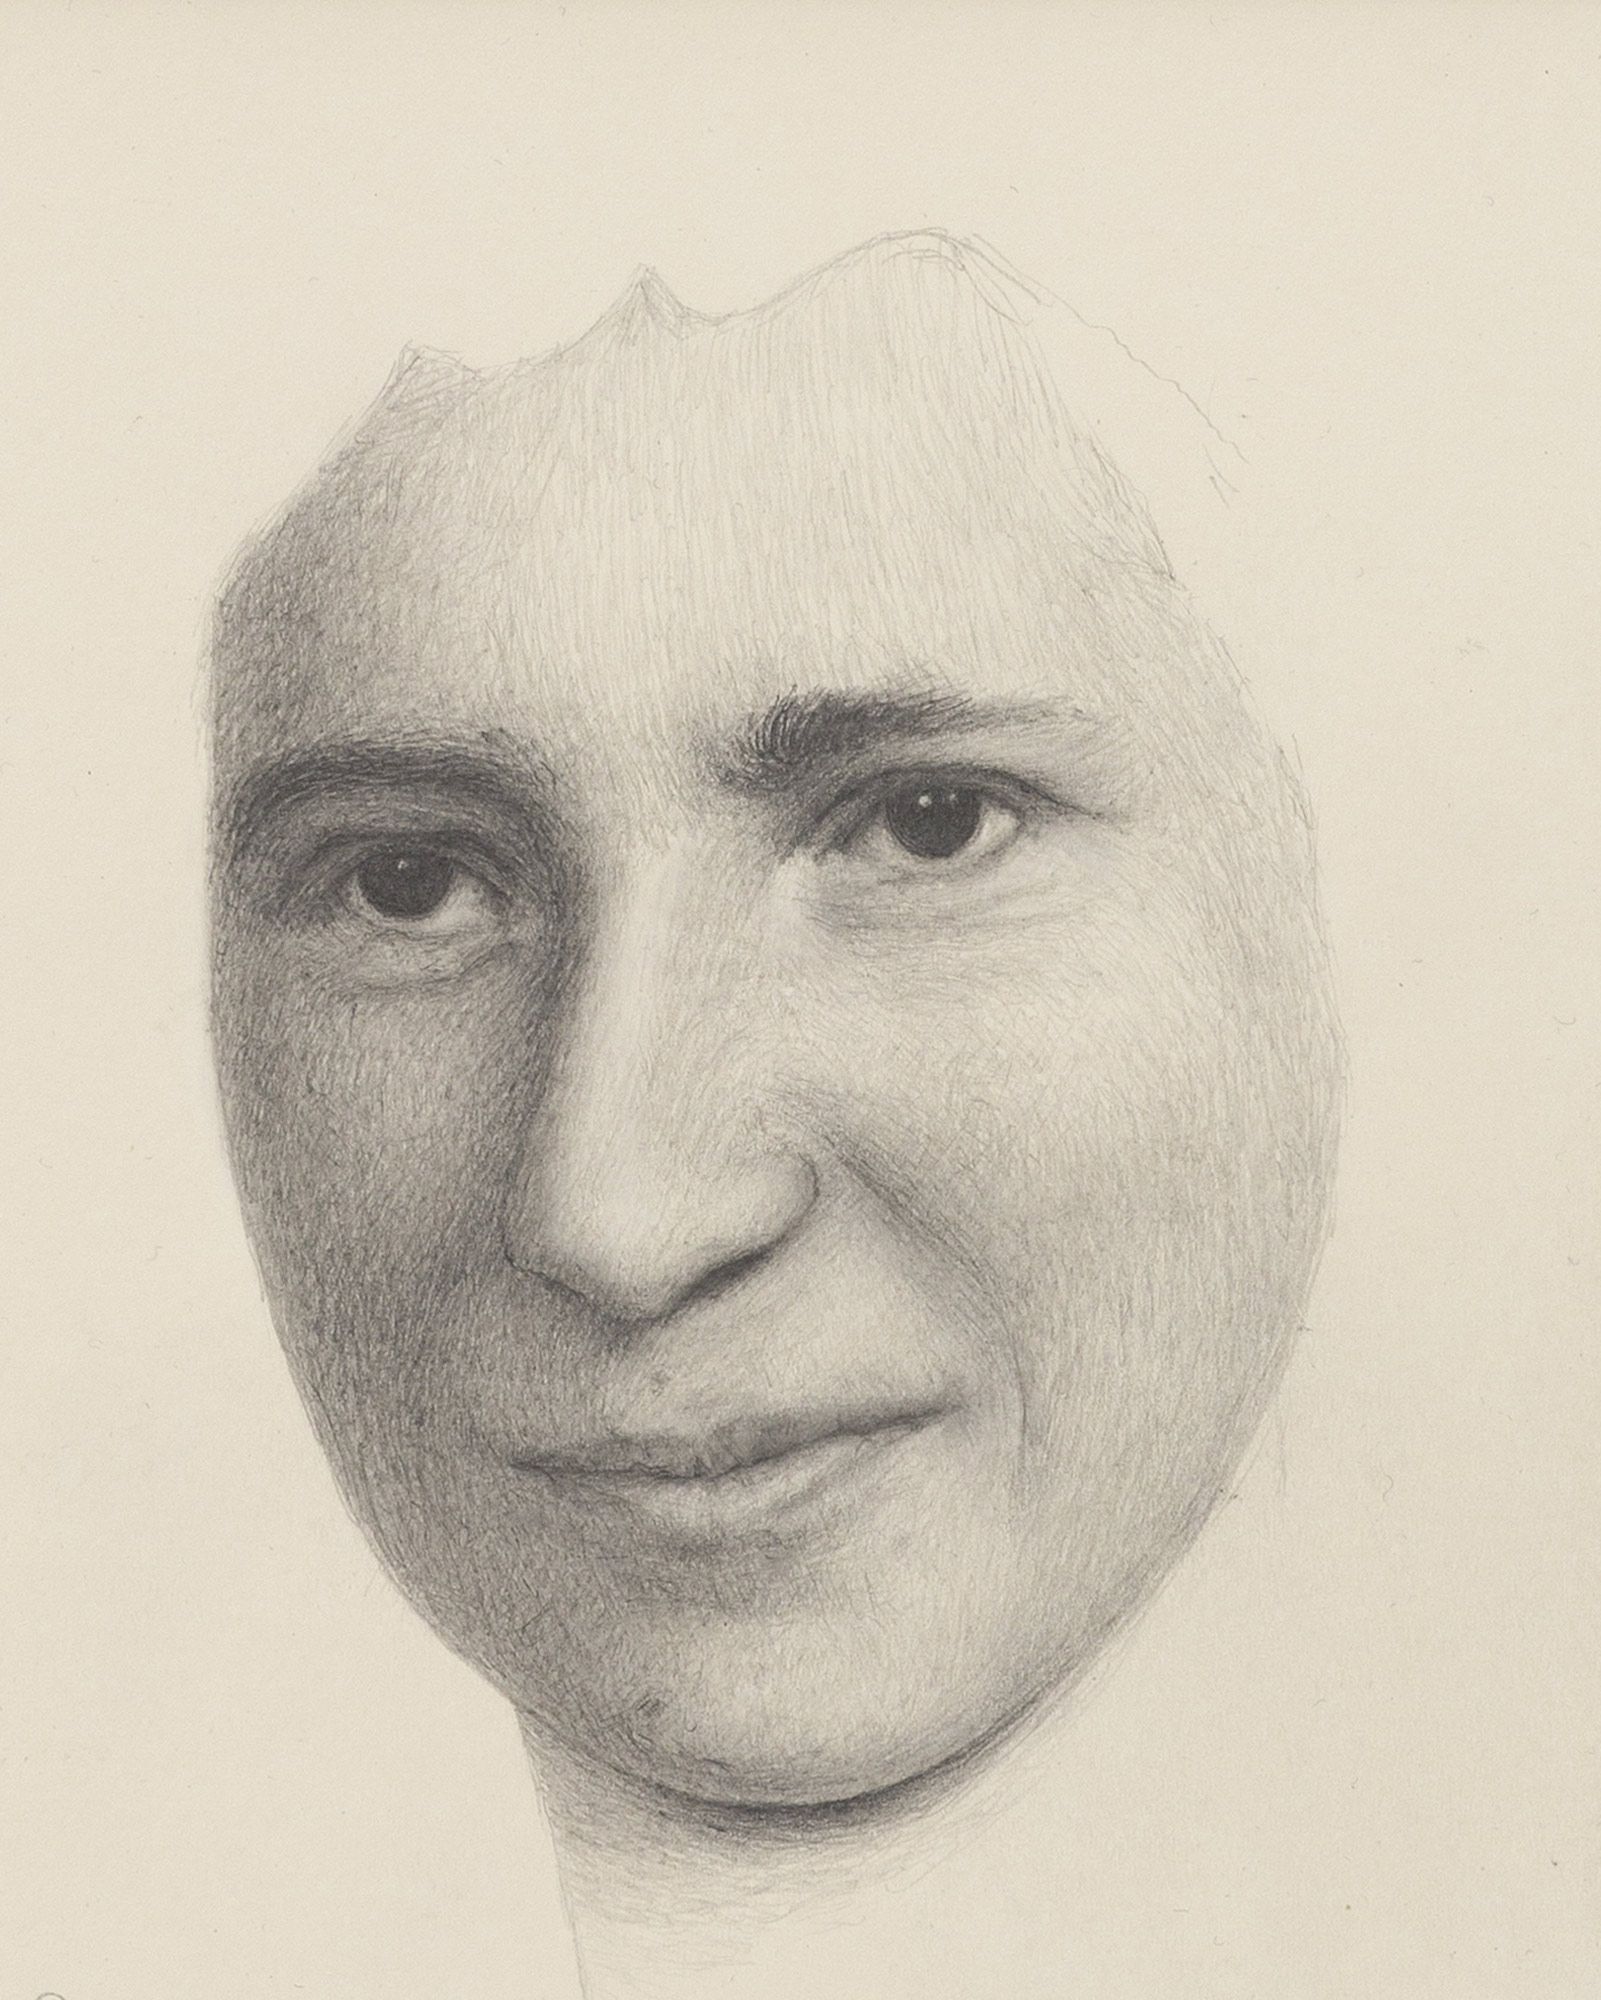 Pencil on paper drawing of  German woman's face from the 1940s not showing hair.